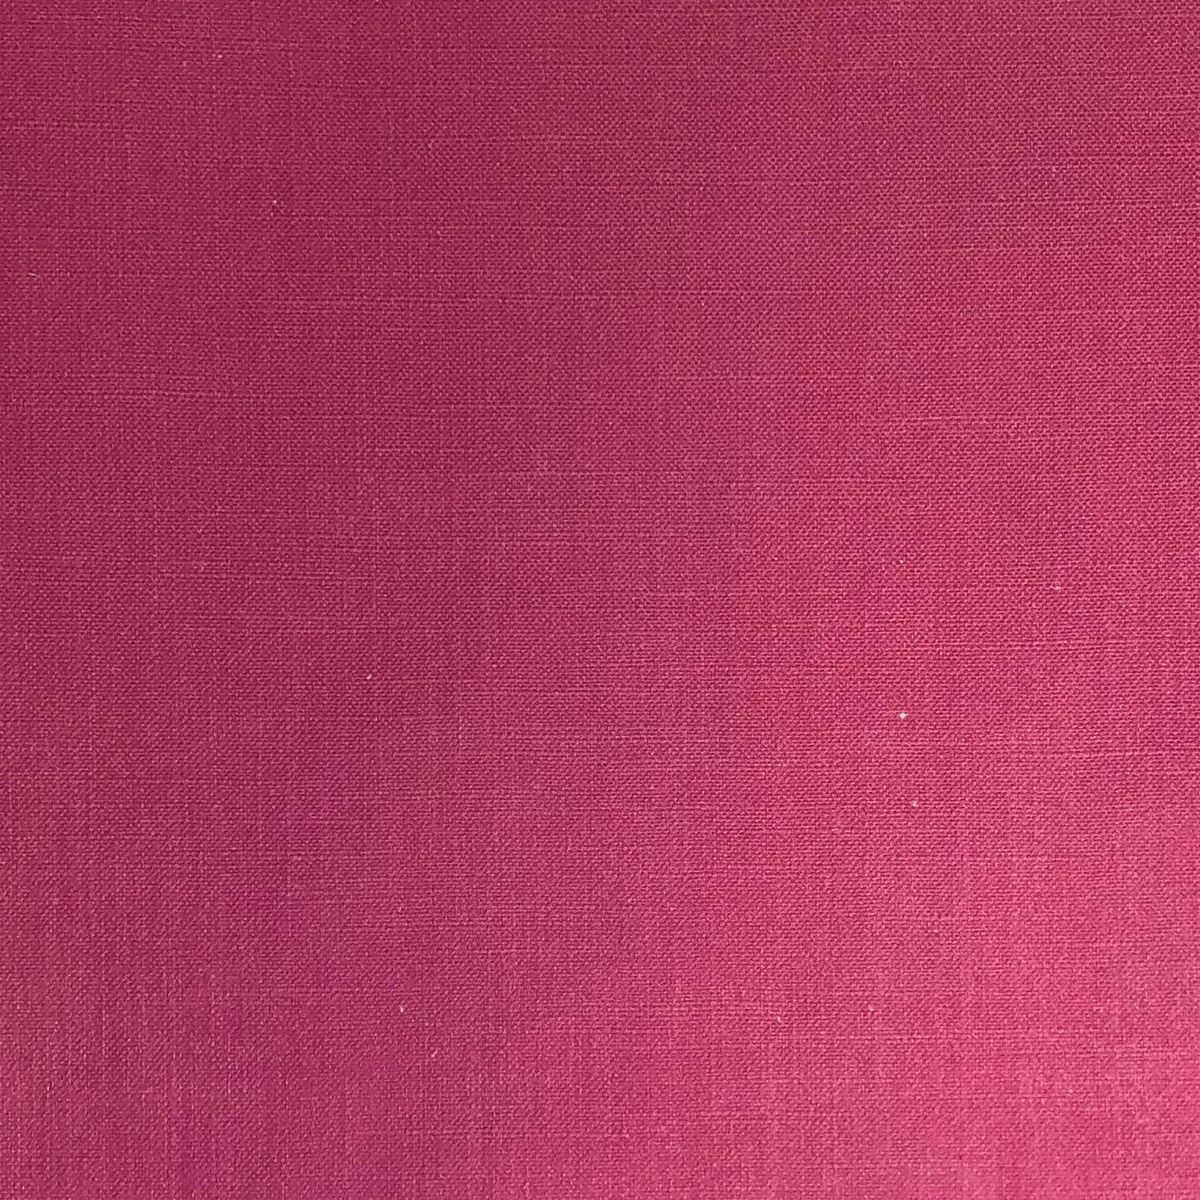 Eden Hot Pink Snr Fabric by Chatham Glyn